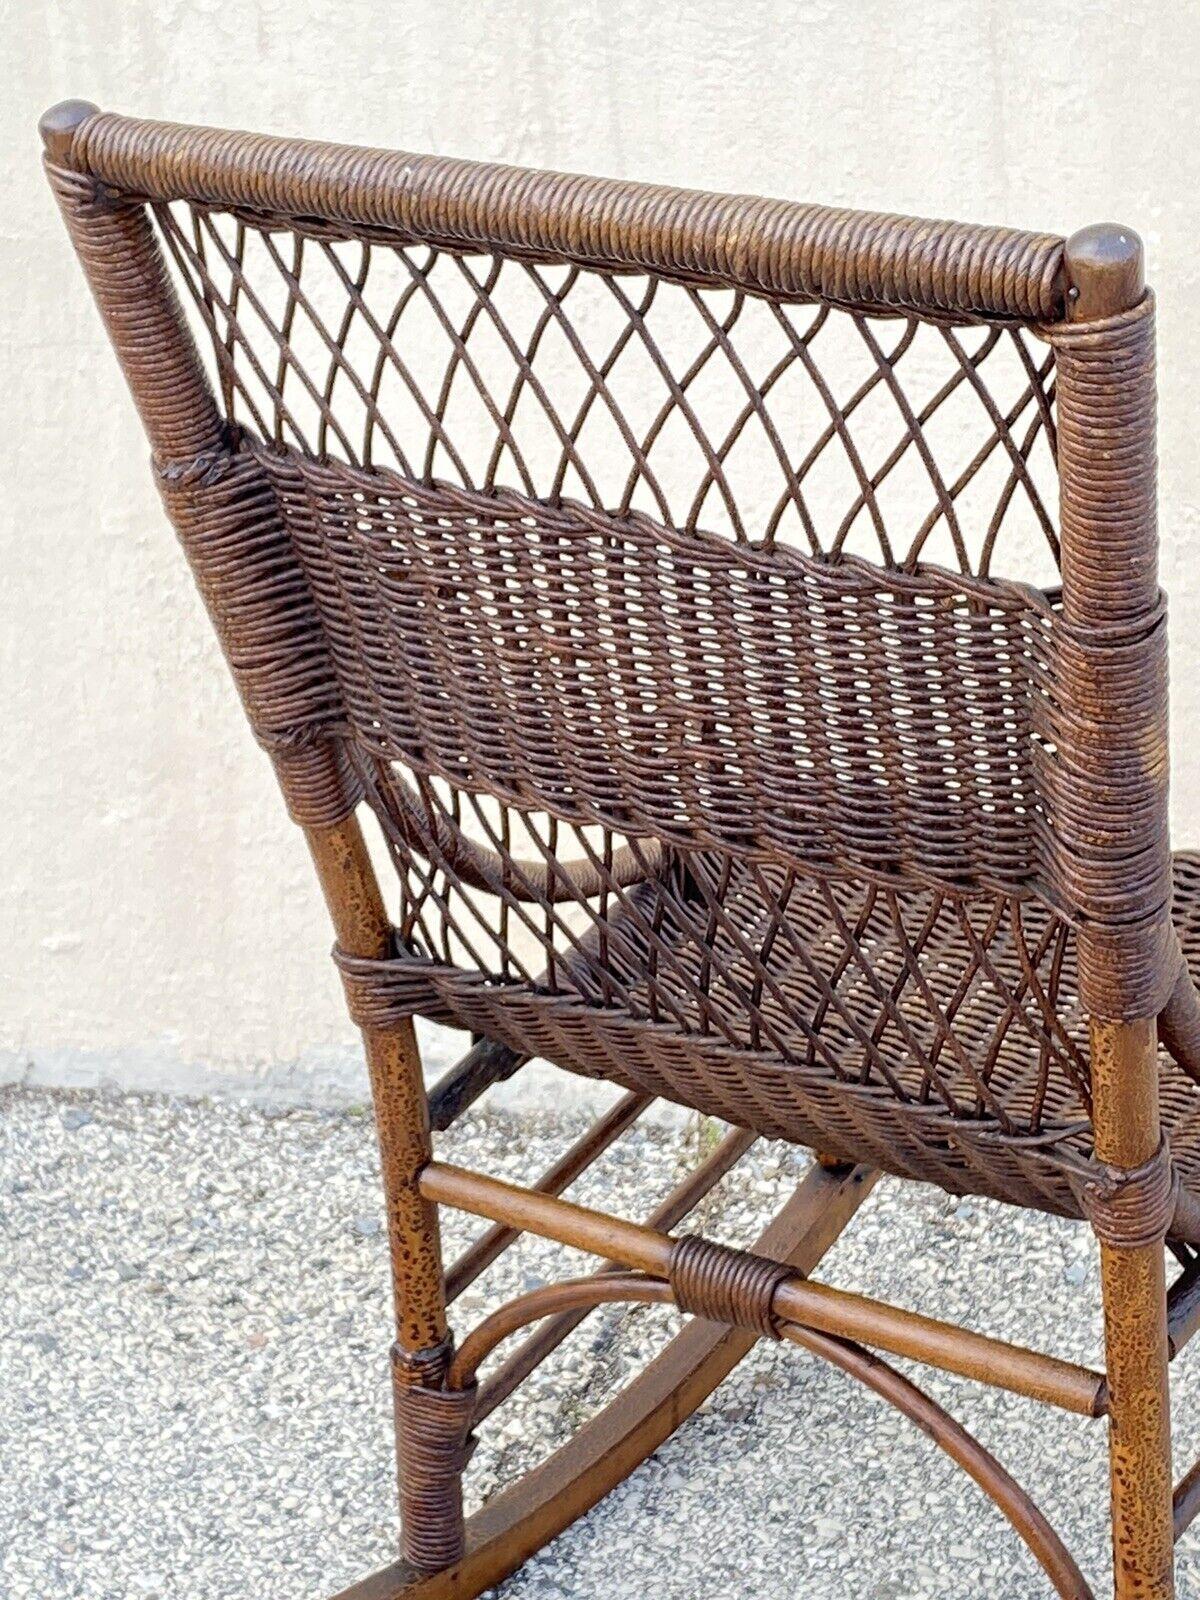 Antique Wicker and Rattan Wooden Victorian Rocking Chair Rocker For Sale 2